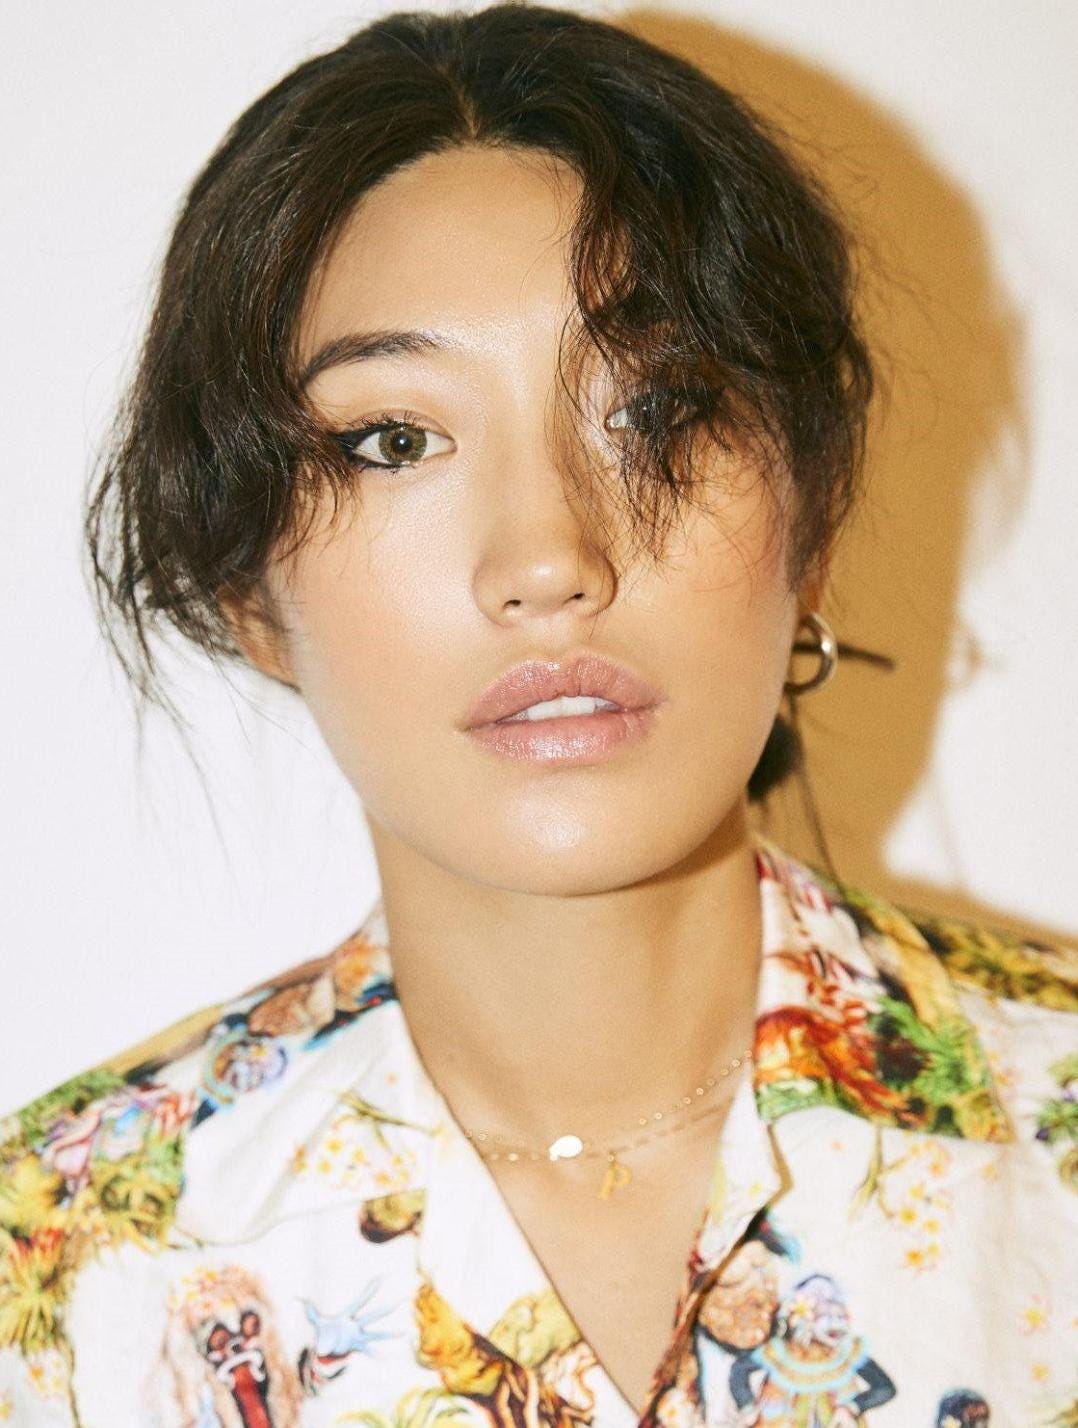 DJ Peggy Gou on the best way to deal with sexism: 'Kill them with kindness', London Evening Standard